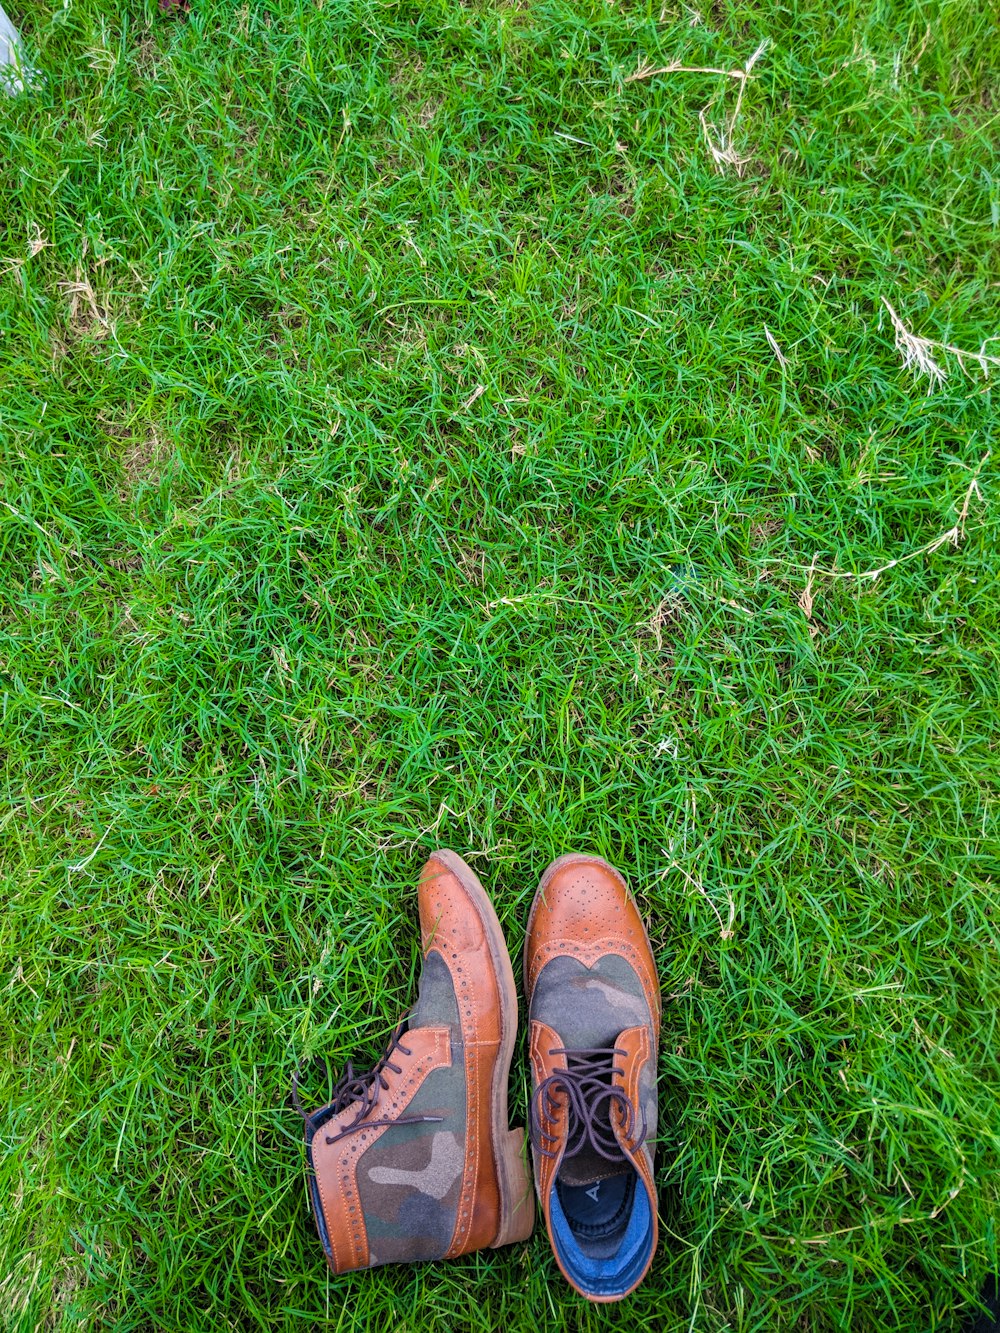 pair of brown-and-gray camouflage leather wing-tip boots on grass